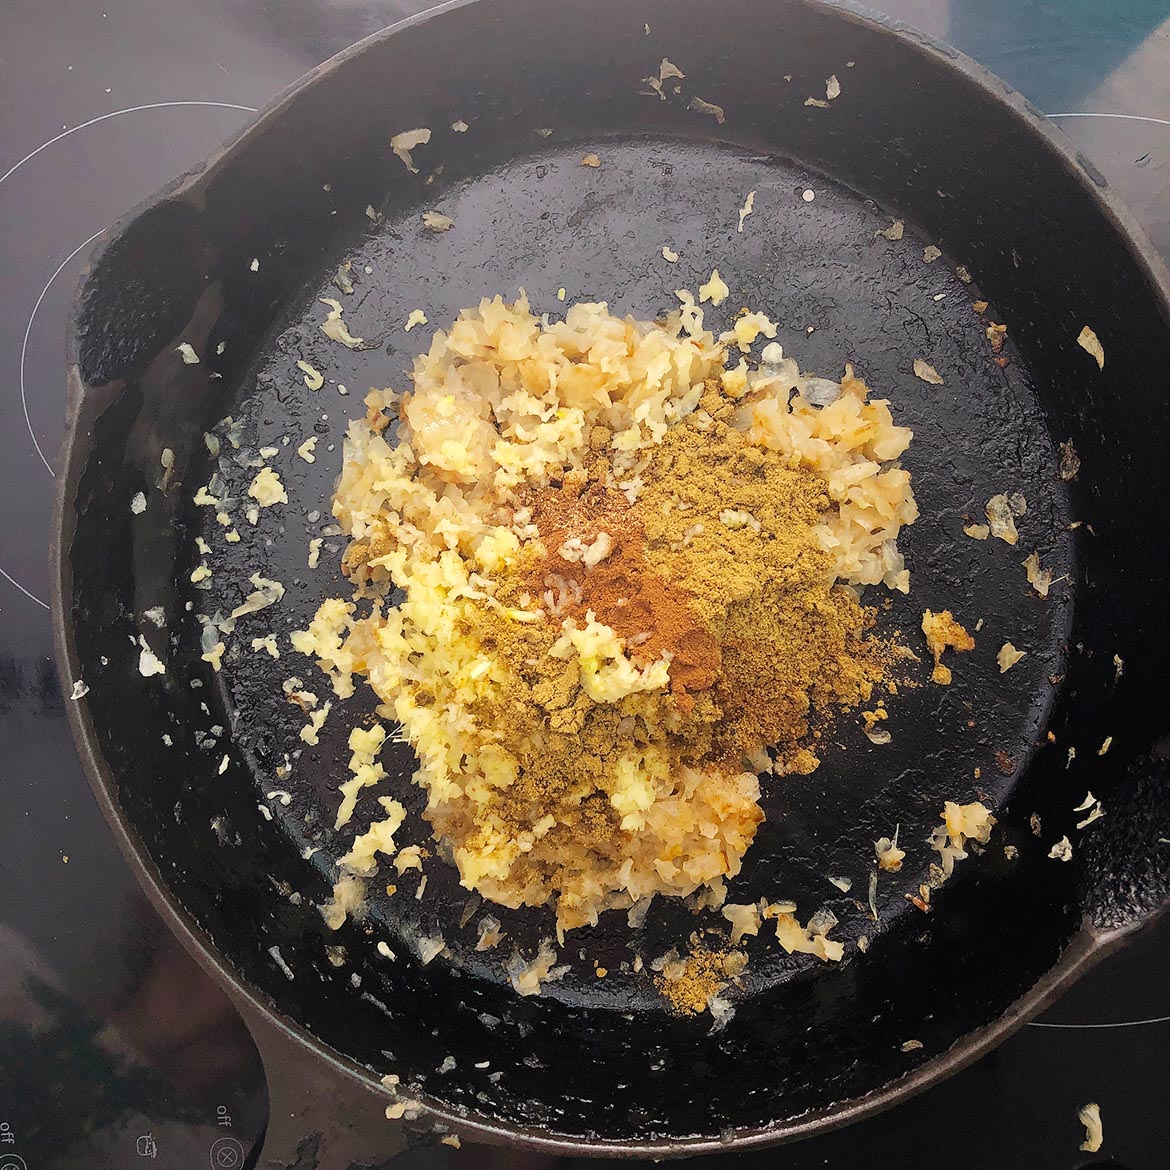 Top-down view of spices added to fried onions. Making Indian-Inspired Cashew Sauce.